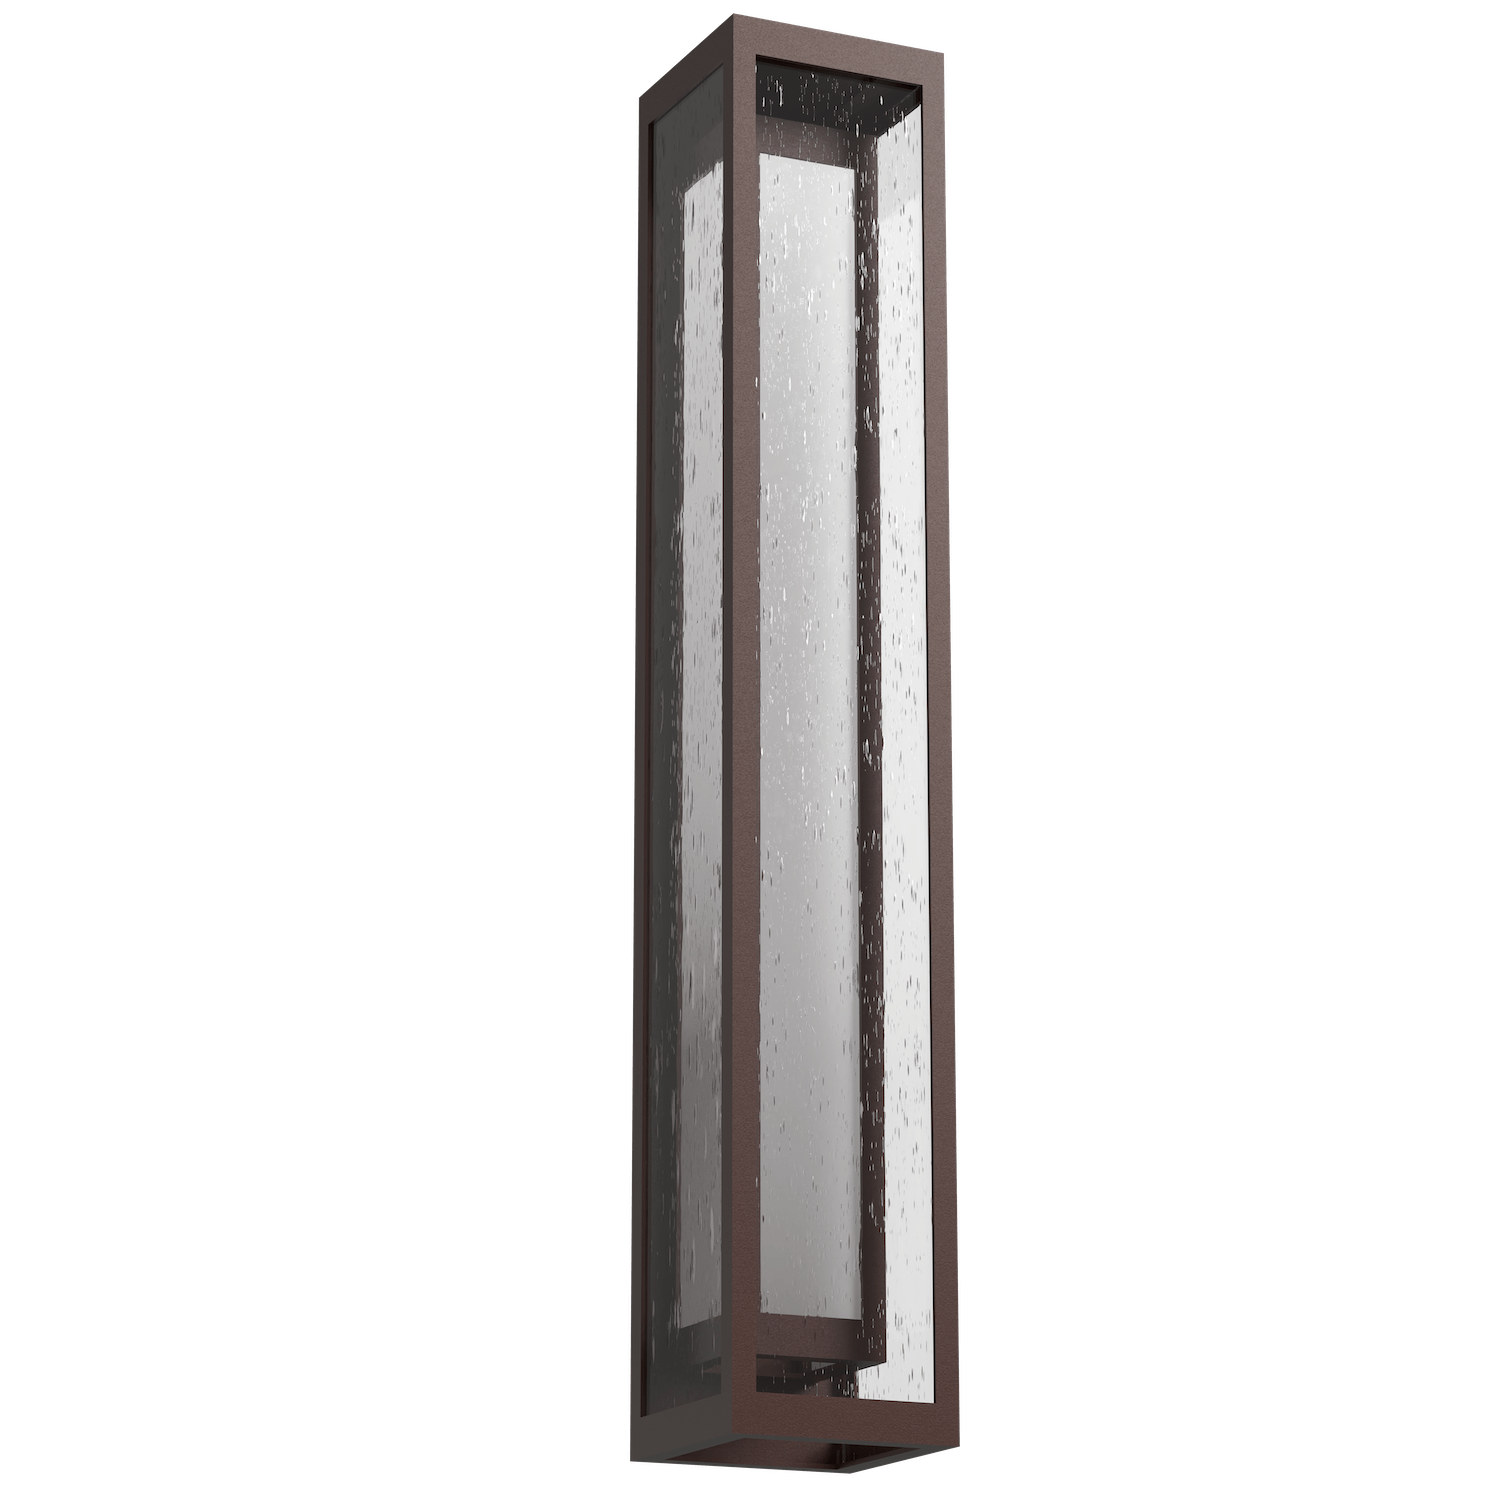 ODB0027-36-SB-F-Hammerton-Studio-Double-Box-36-inch-outdoor-sconce-with-statuary-bronze-finish-and-frosted-glass-shade-and-LED-lamping